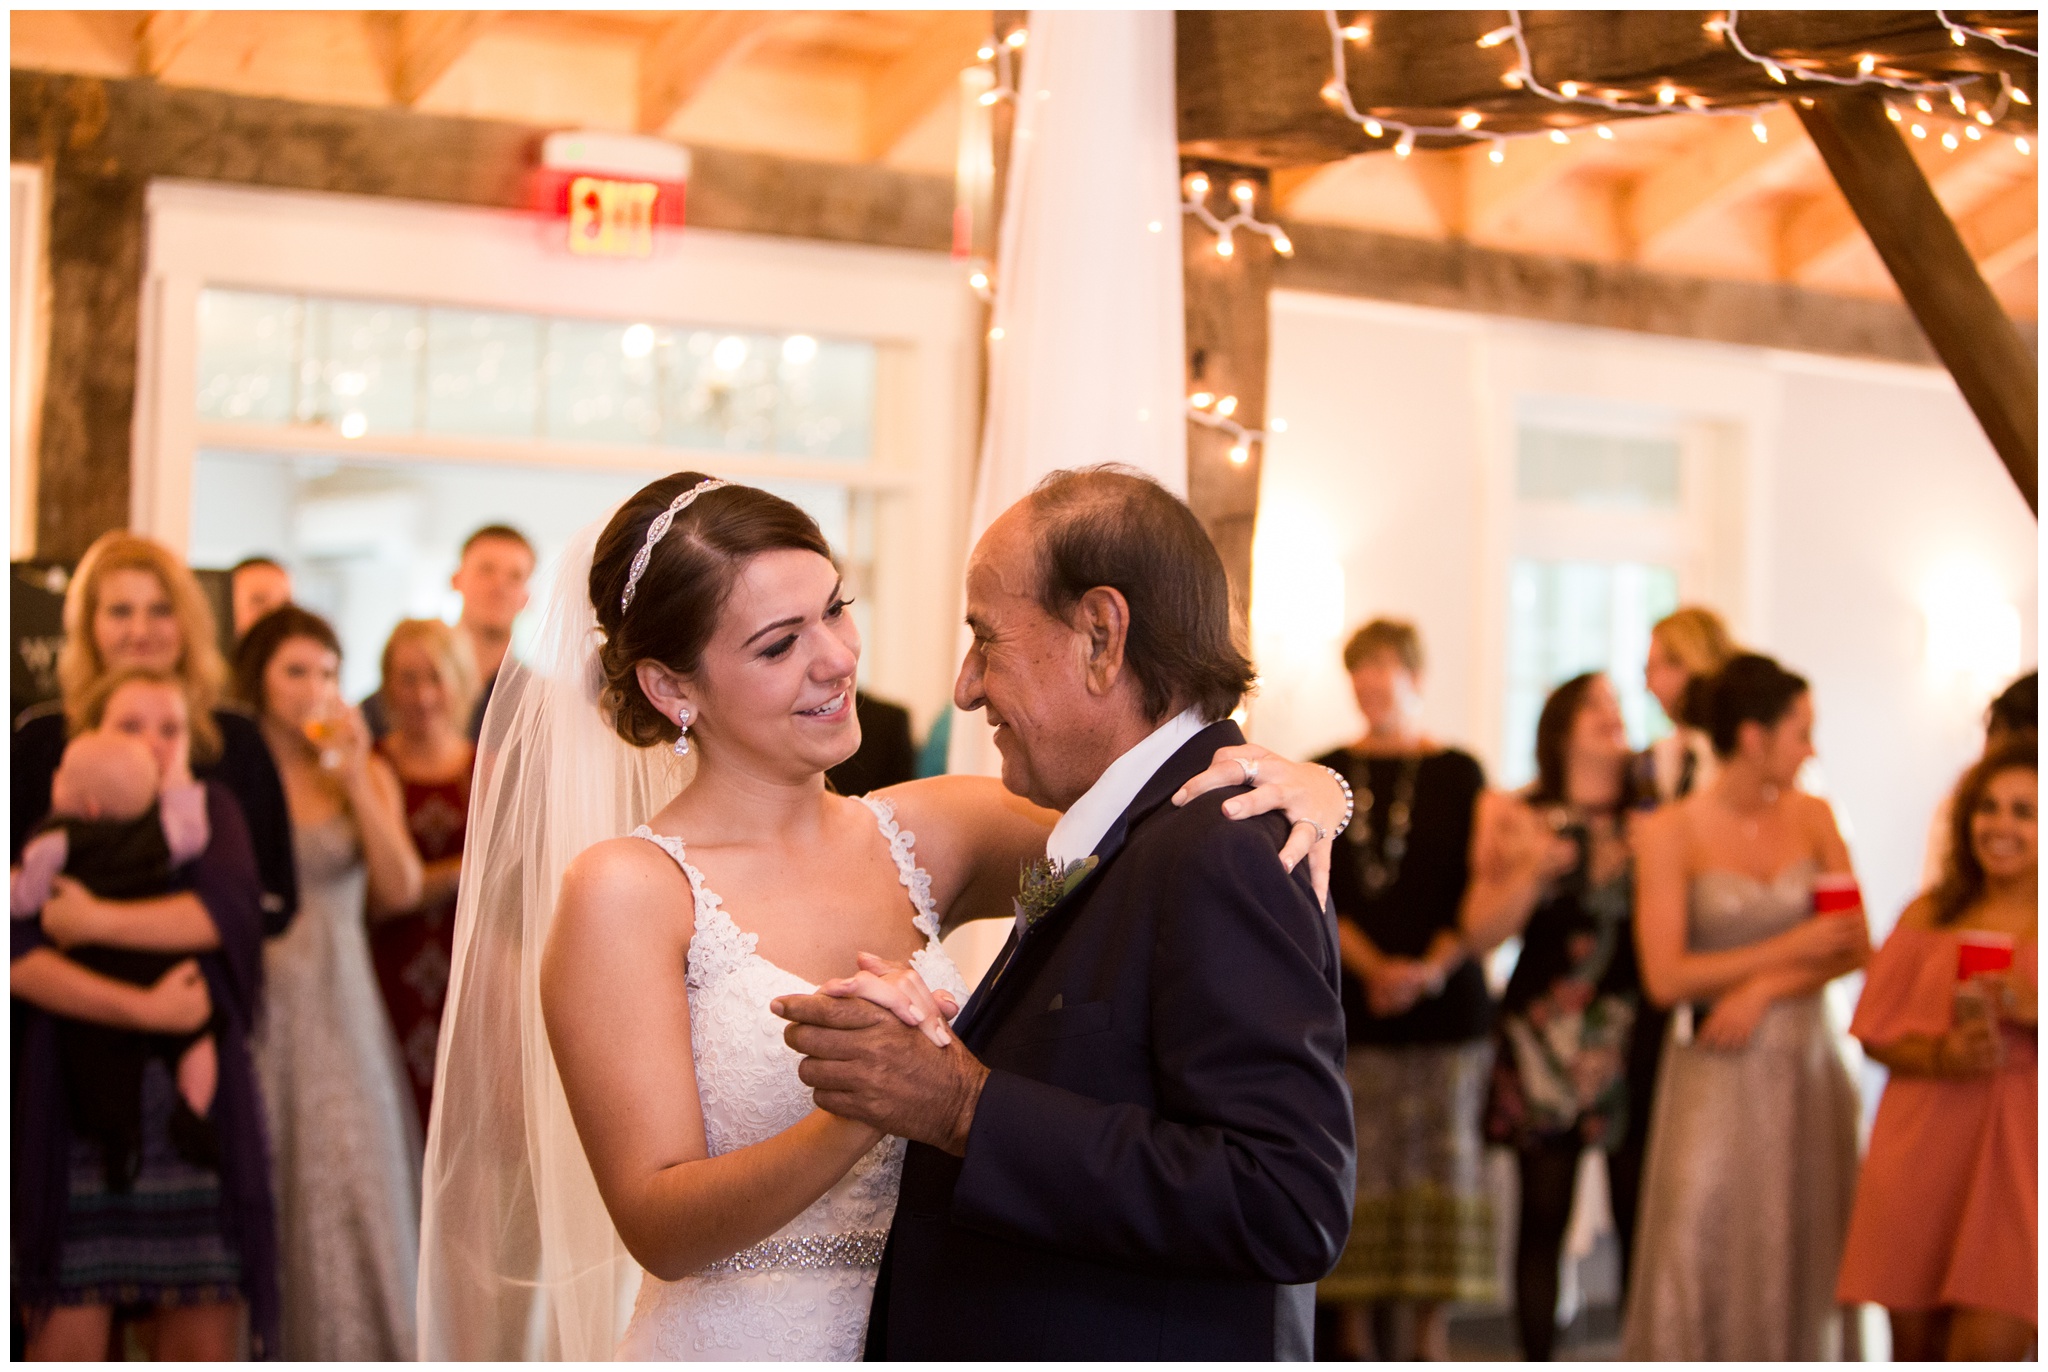 father-daughter dance at reception at the Lodge at River Valley Farm in Yorktown Indiana